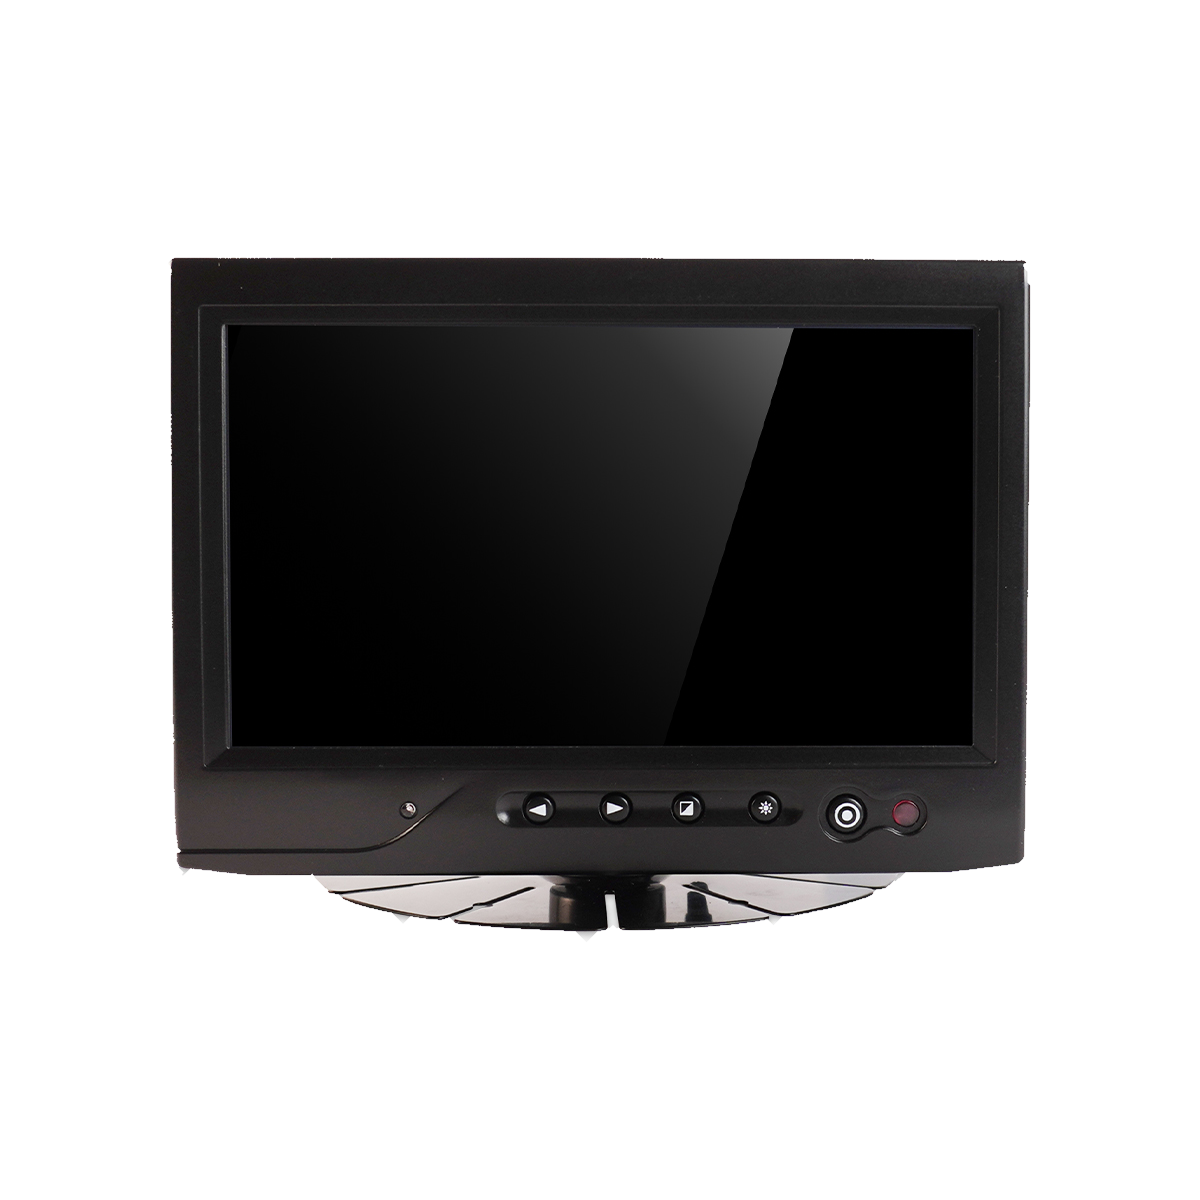 SEF709TPC-PCT is an industrial touch monitor which can be used to any kinds of vehicles.